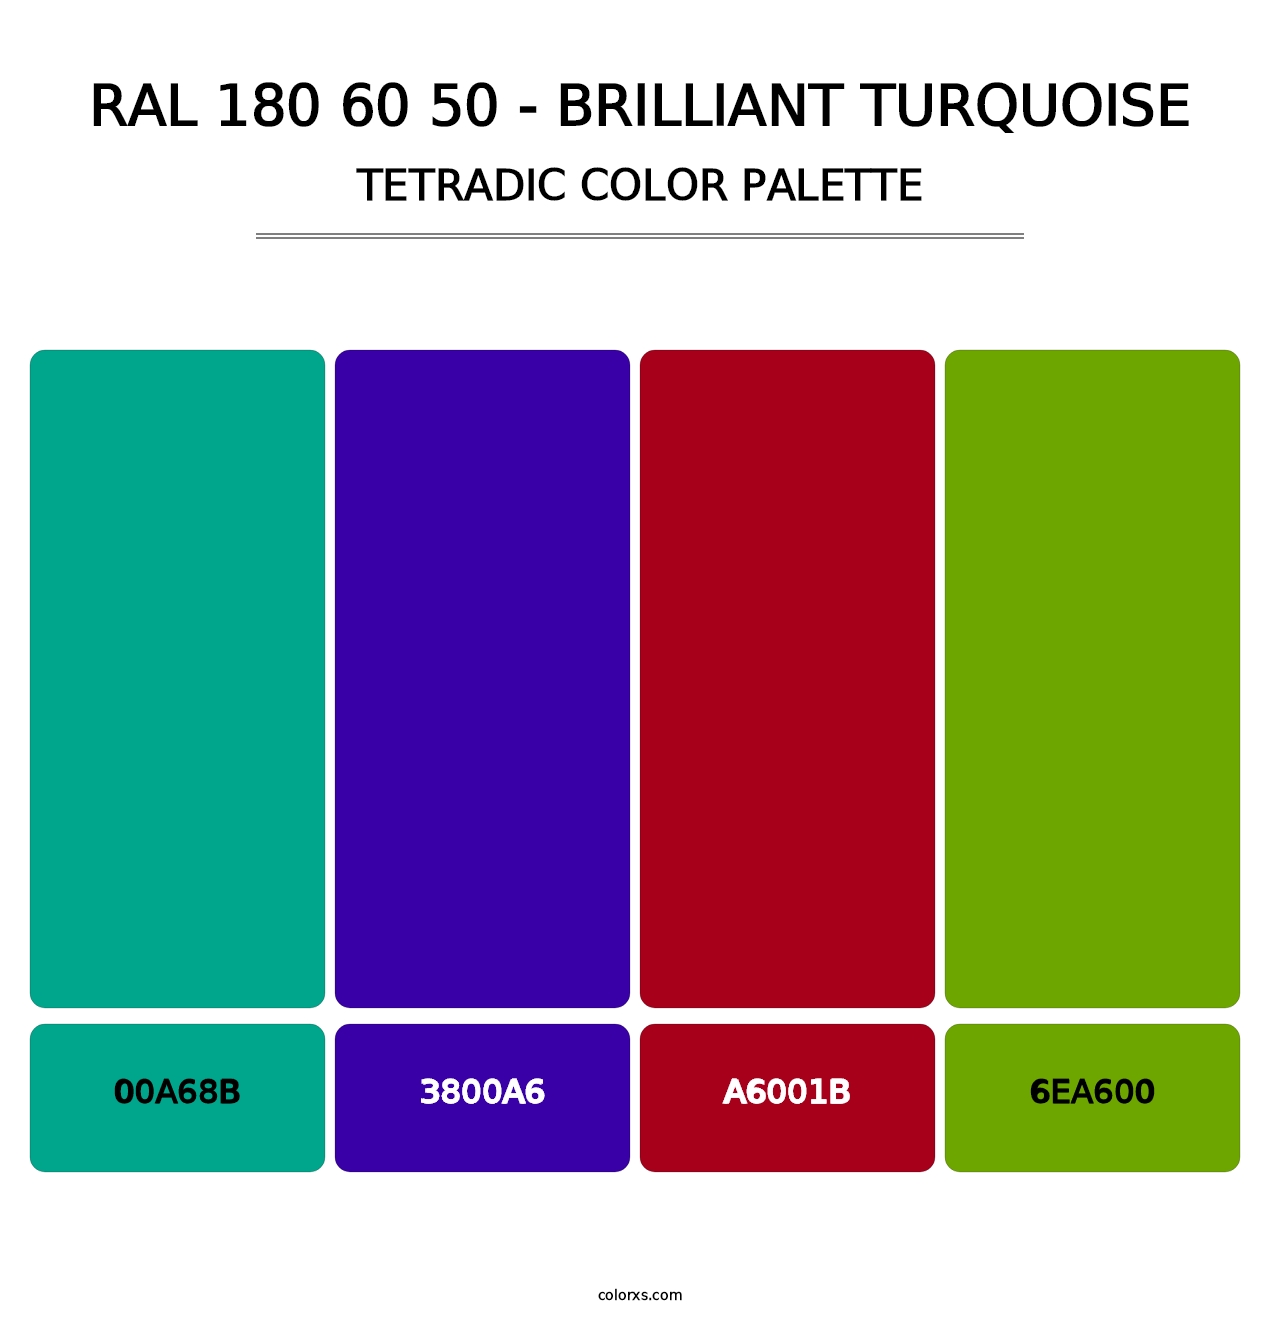 RAL 180 60 50 - Brilliant Turquoise - Tetradic Color Palette